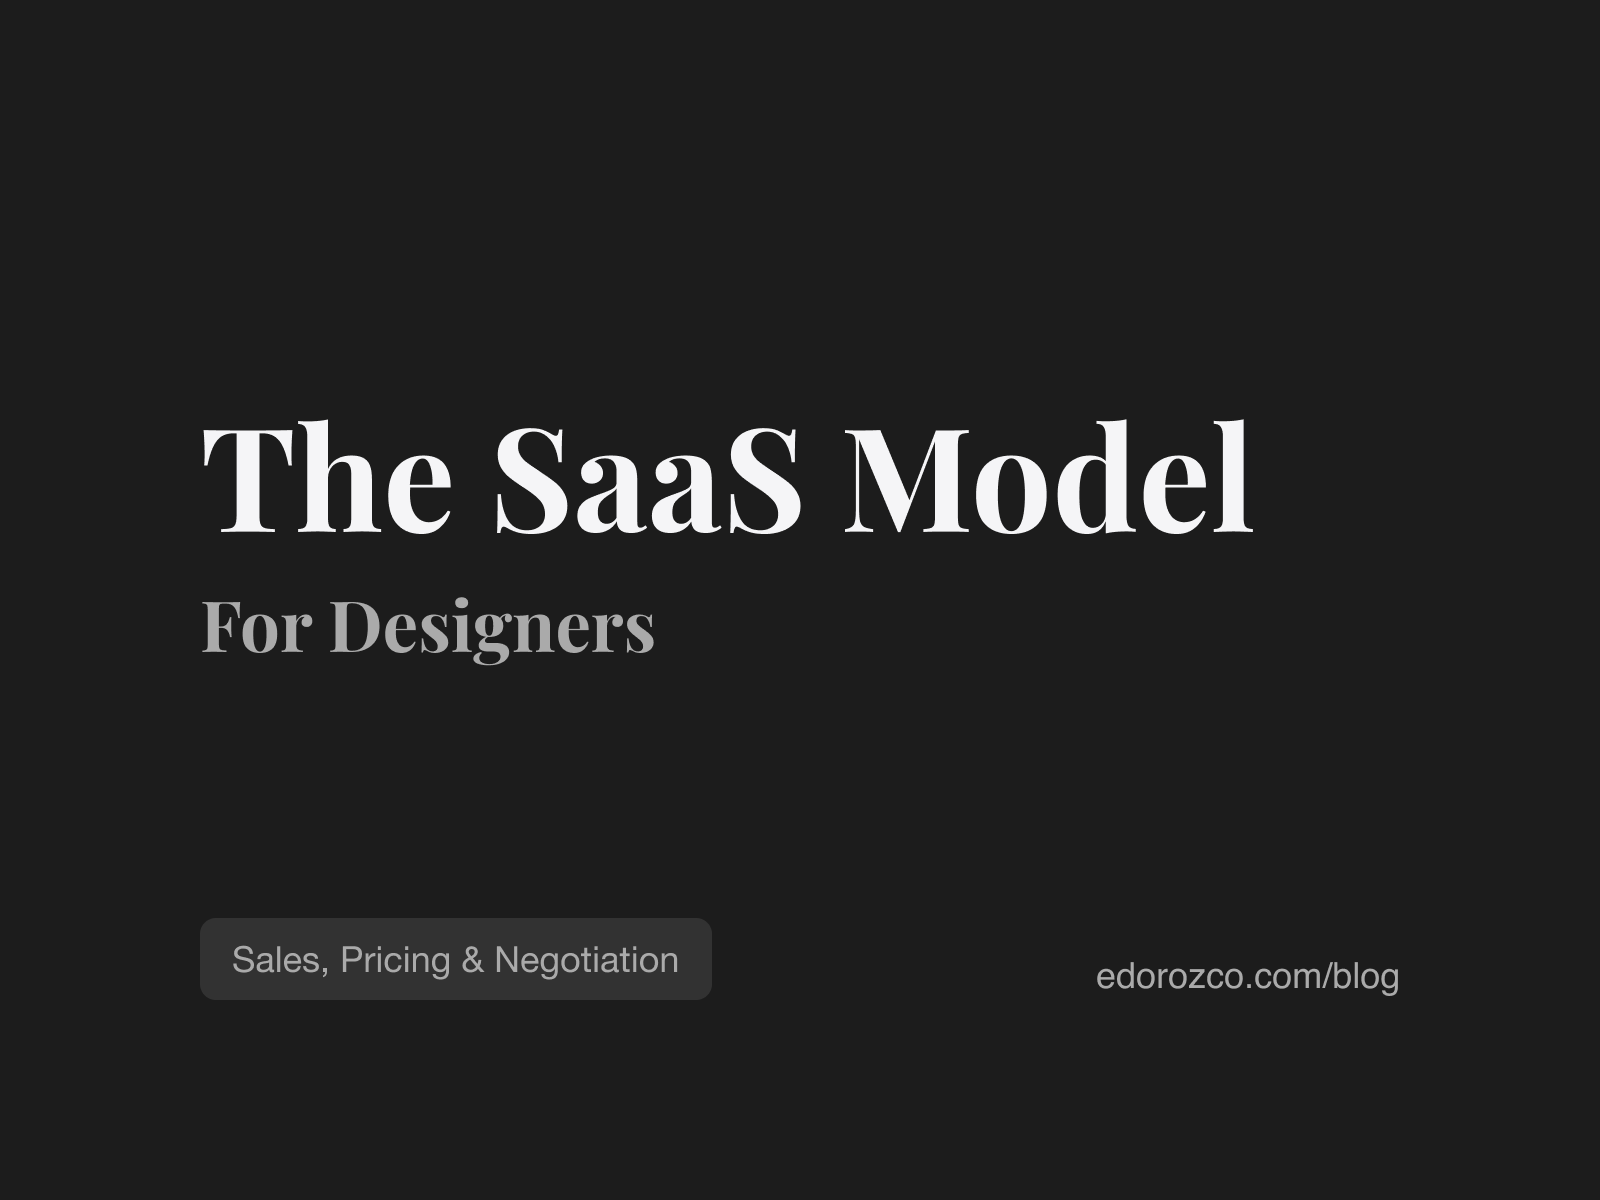 The SaaS Model for Designers